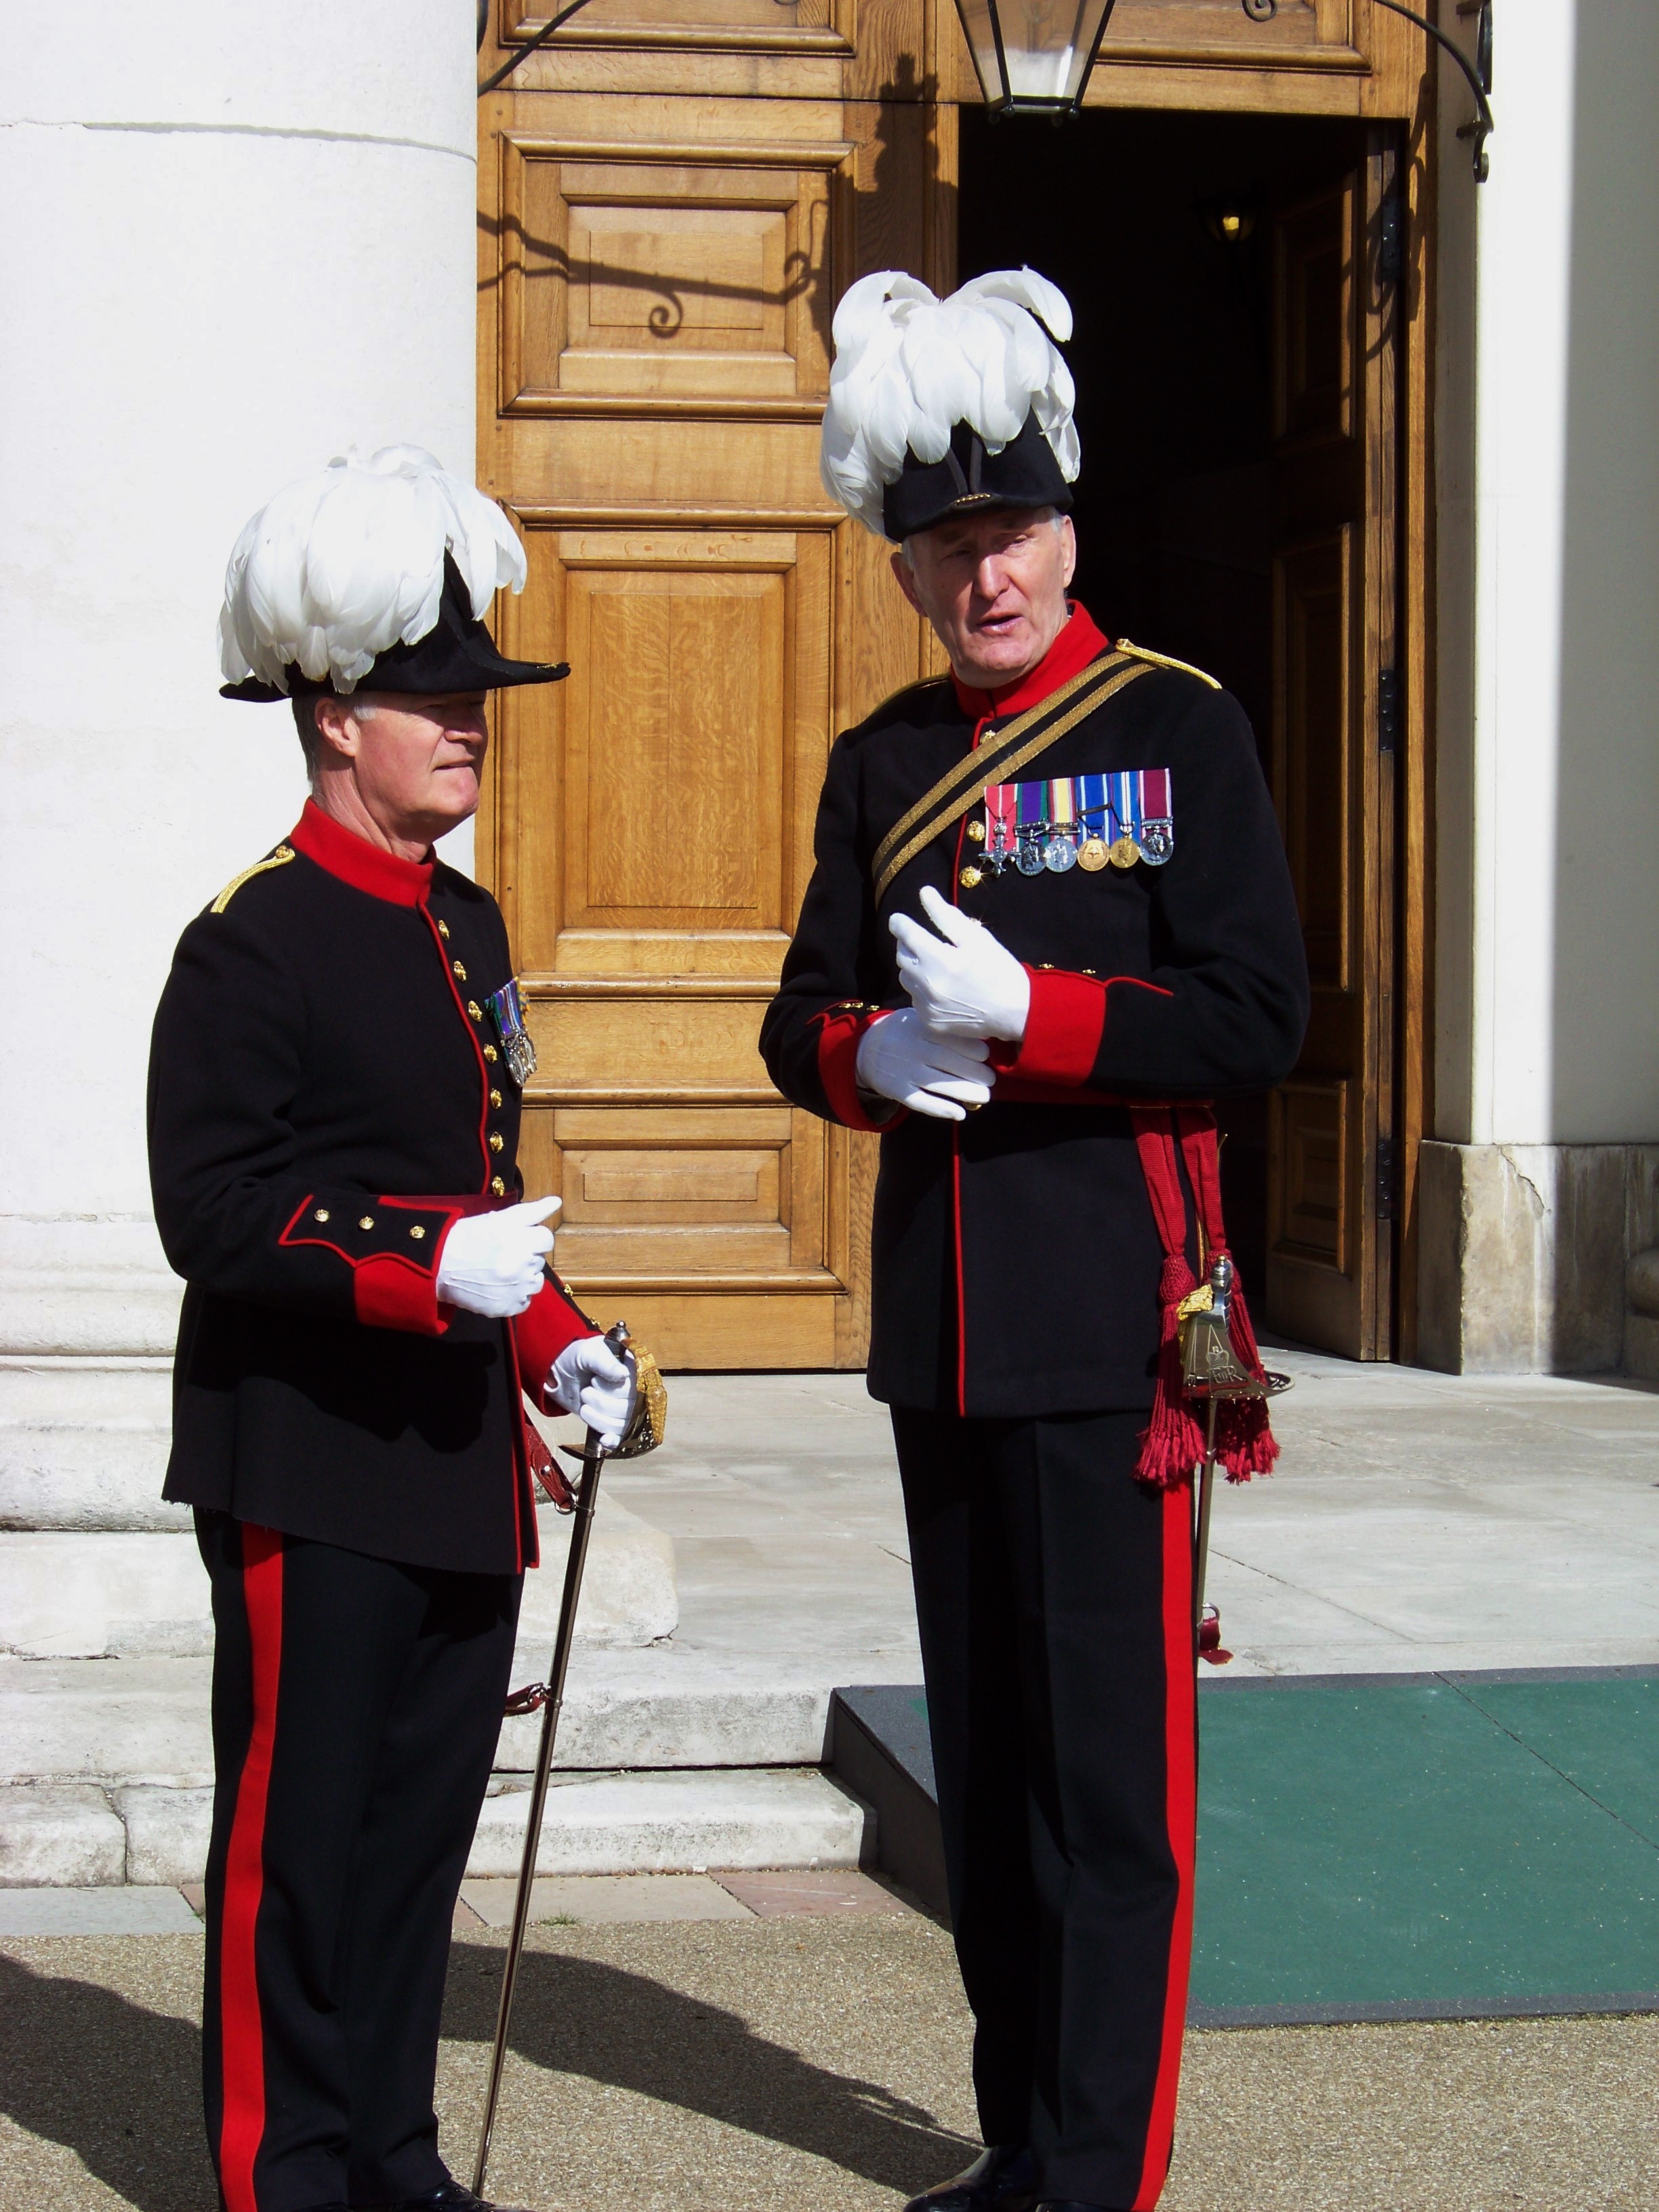 Captain of Invalids, Lt Col Rupert Lucas, briefs the Reviewing Officer, Quartermaster Lt Col Andy Hinkling, MBE.